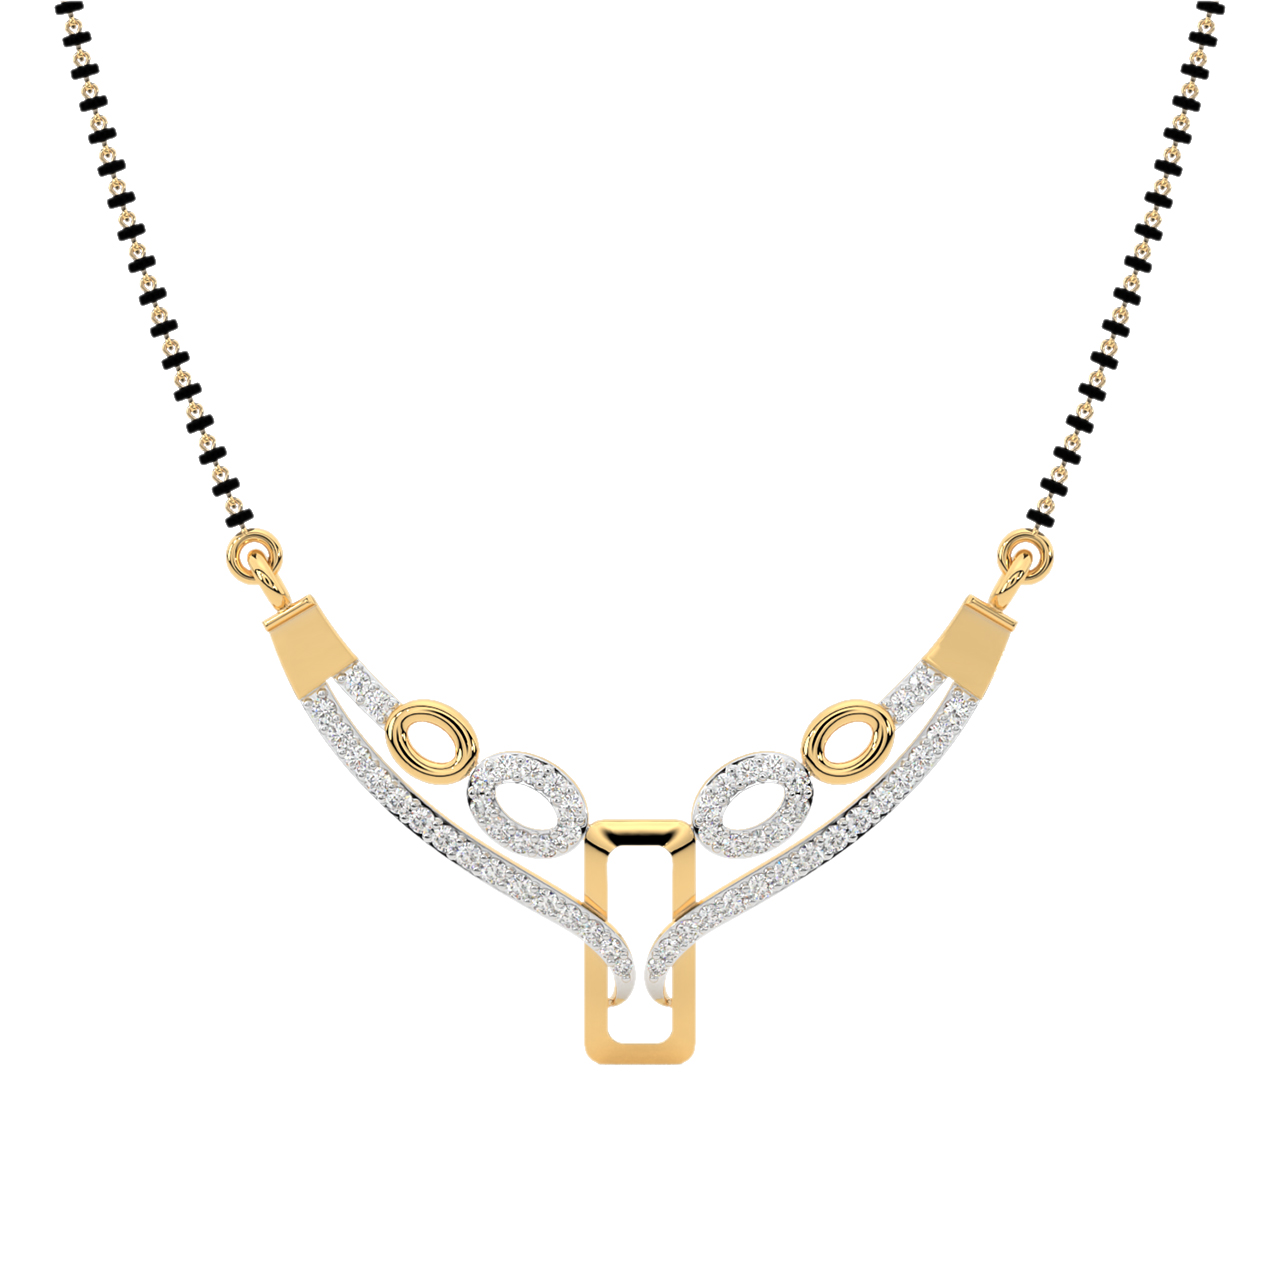 Mangalsutra Design Latest For Women With Chain